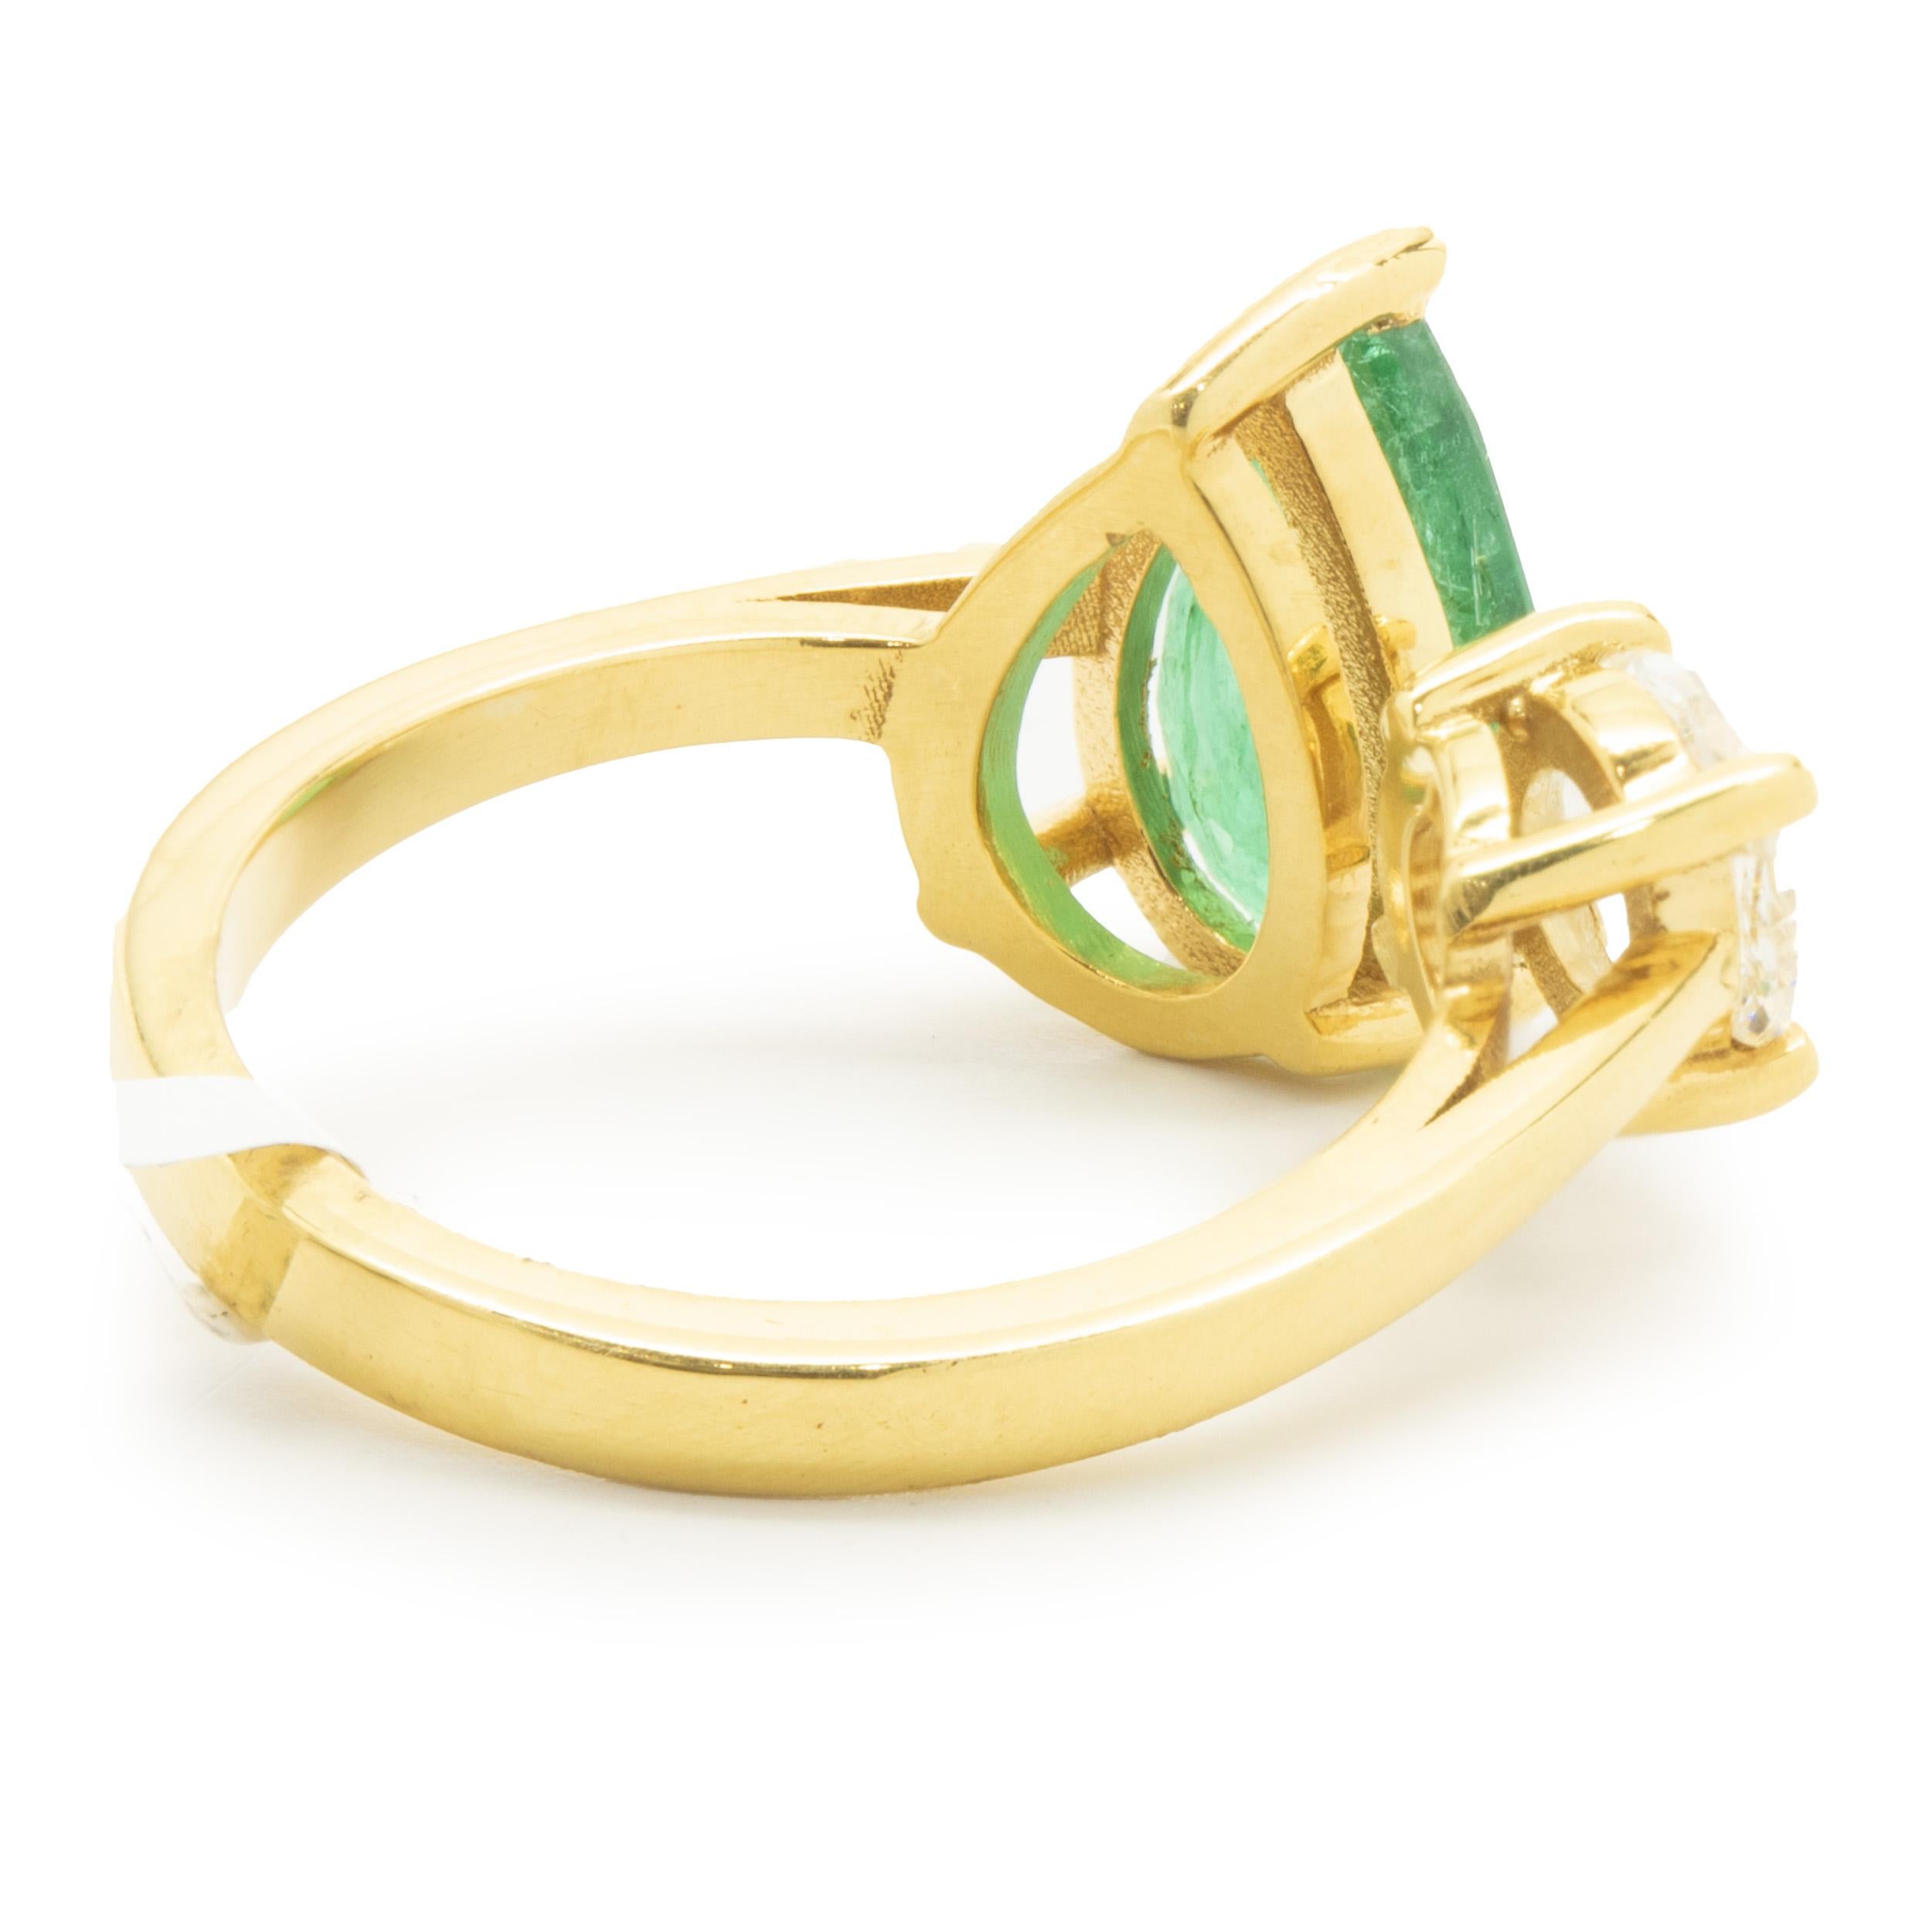 18 Karat Yellow Gold Emerald and Rose Cut Diamond Dual Ring In Excellent Condition For Sale In Scottsdale, AZ